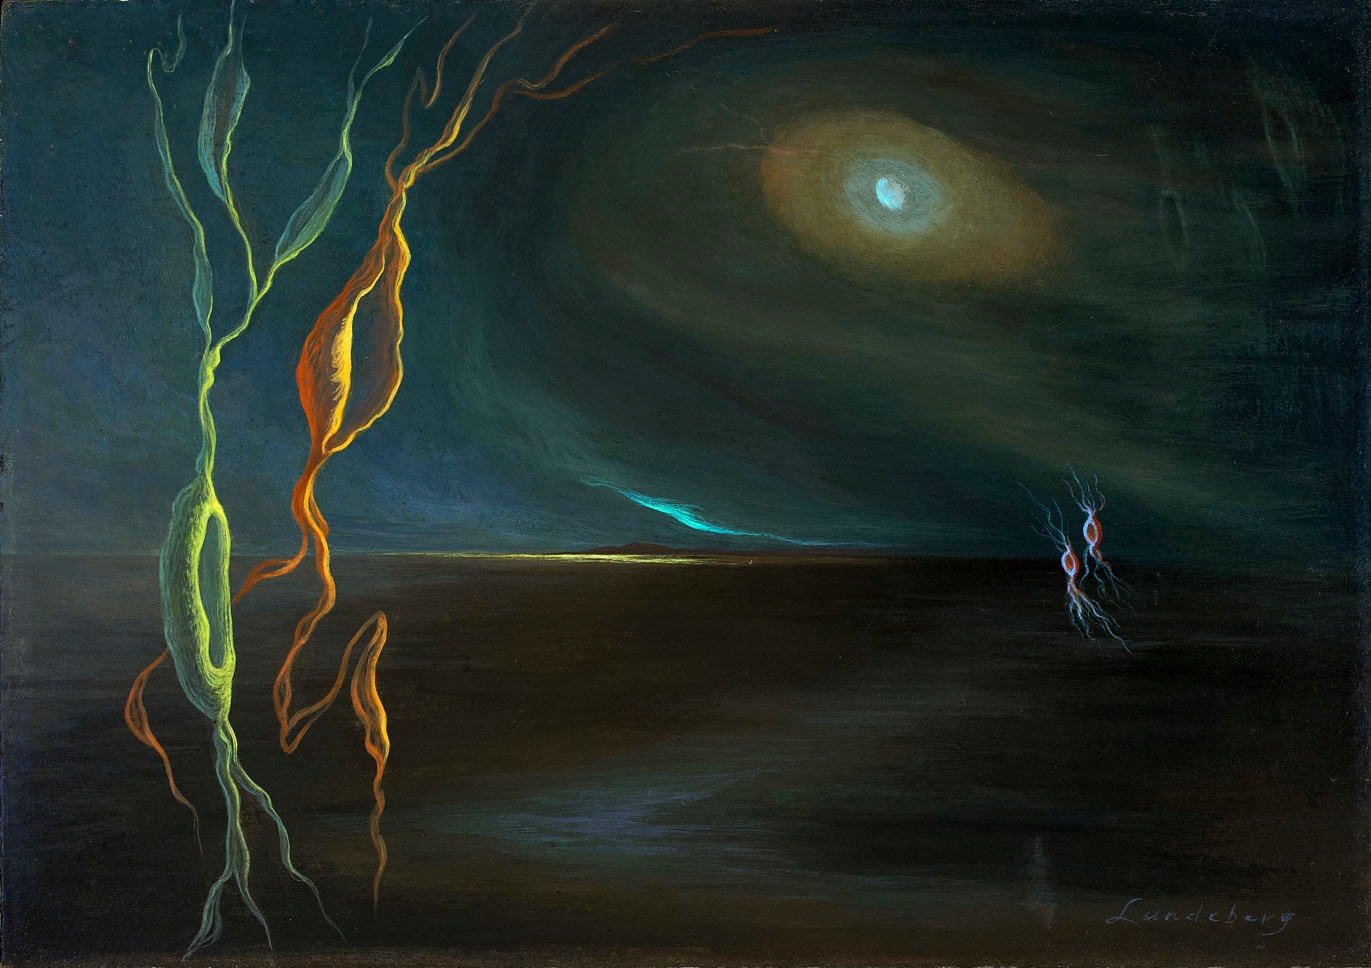 Helen Lundeberg

Biological Fantasy, 1946

oil on board

10 x 14 inches;&amp;nbsp;&amp;nbsp;25.4 x 35.6 centimeters&amp;nbsp;&amp;nbsp;&amp;nbsp;&amp;nbsp;&amp;nbsp;